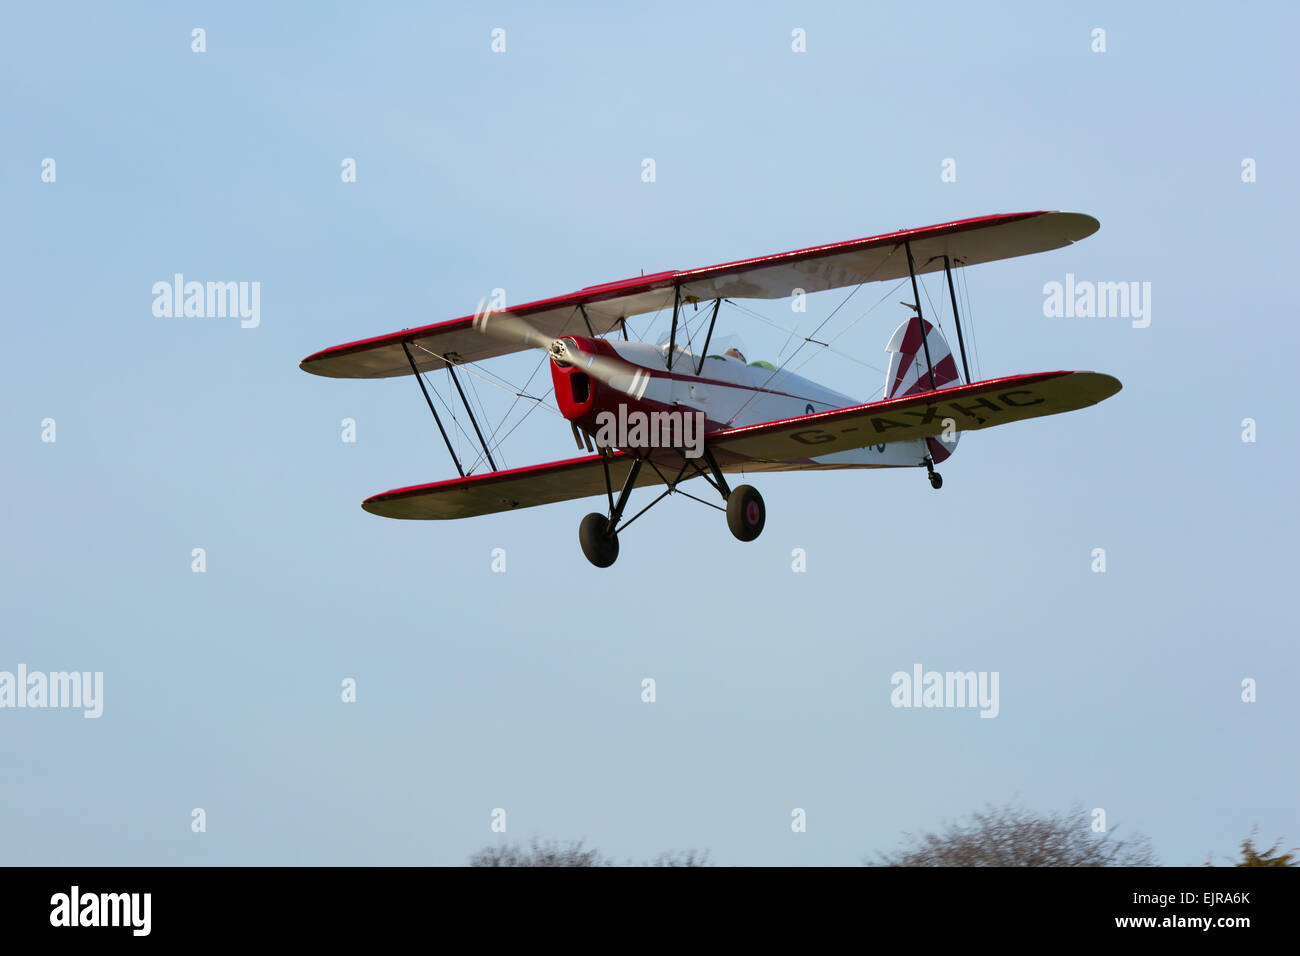 Stampe SV-4C G-AXHC on final approach to land at Netherthorpe Airfield Stock Photo